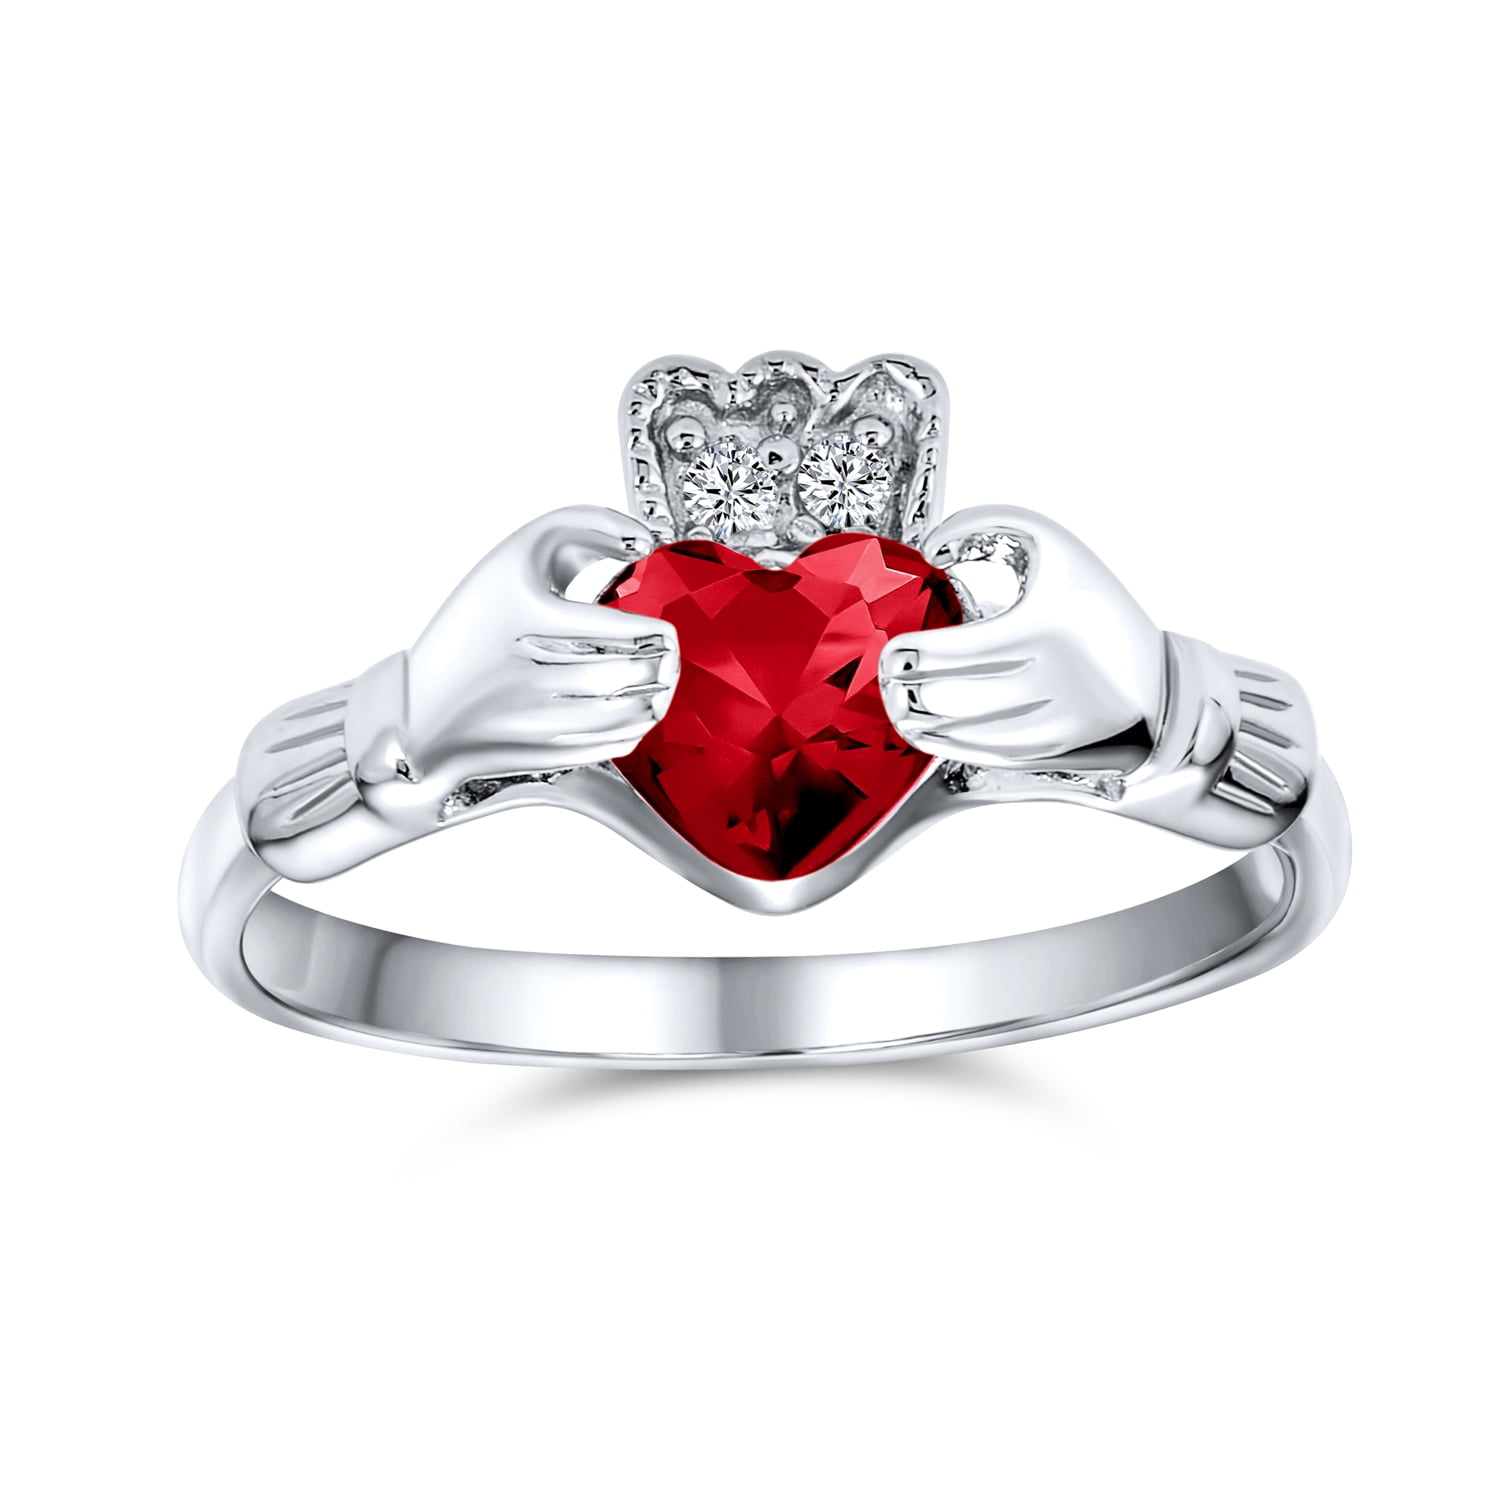 Circle Simulated Ruby Cubic Zirconia Claddagh Pendant Sterling Silver